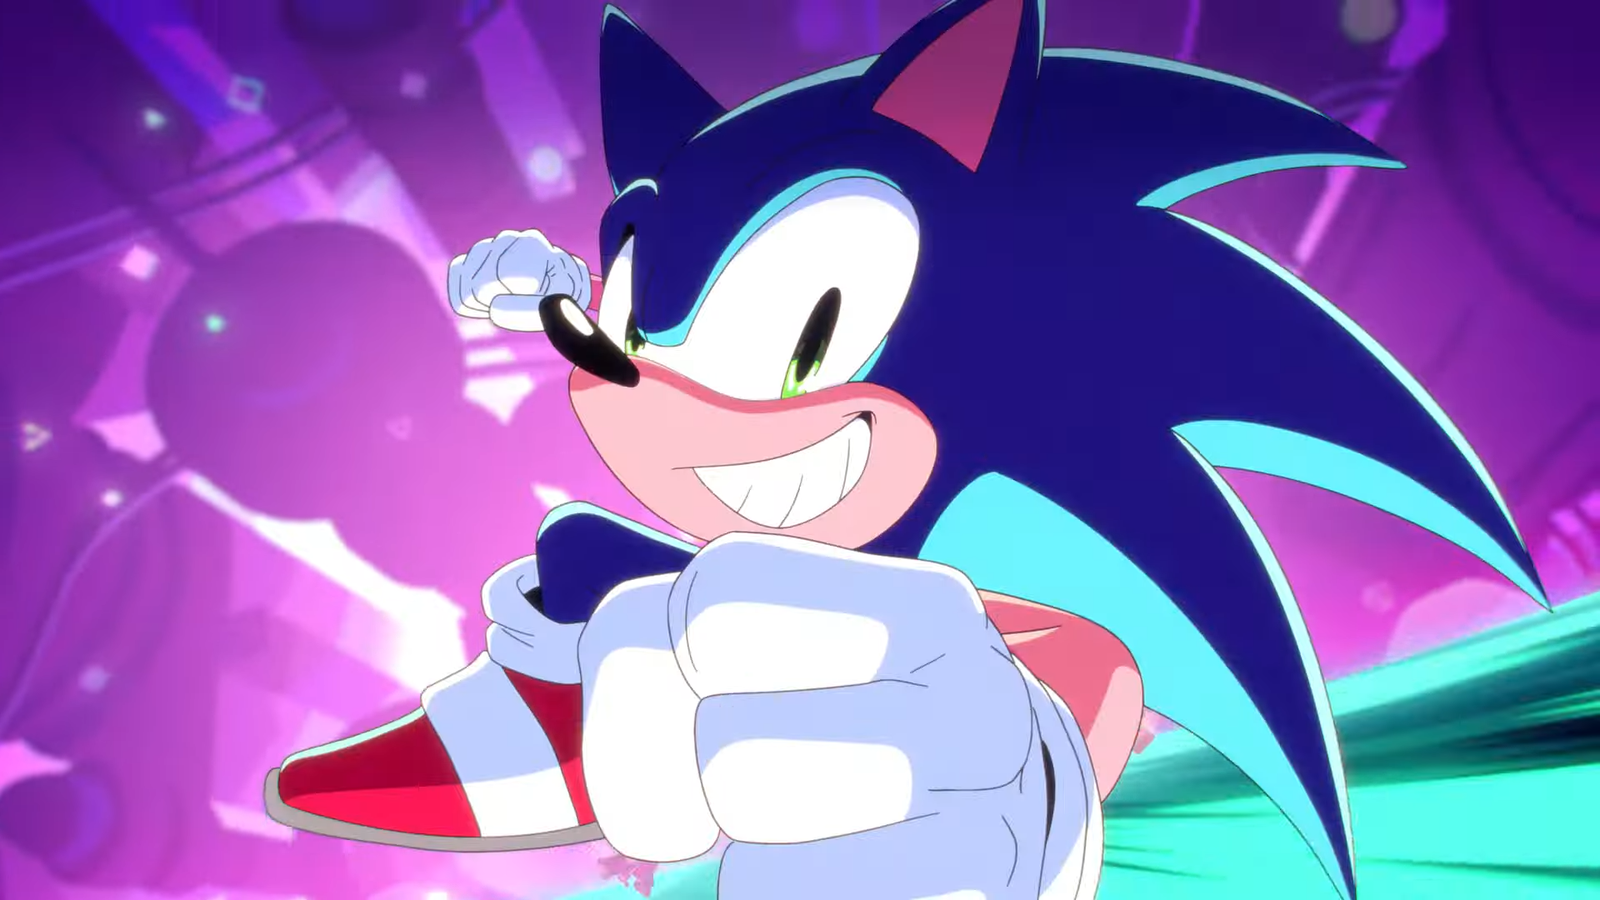 Sonic Superstars Won't Include Shadow, But He Might Feature In A New Game